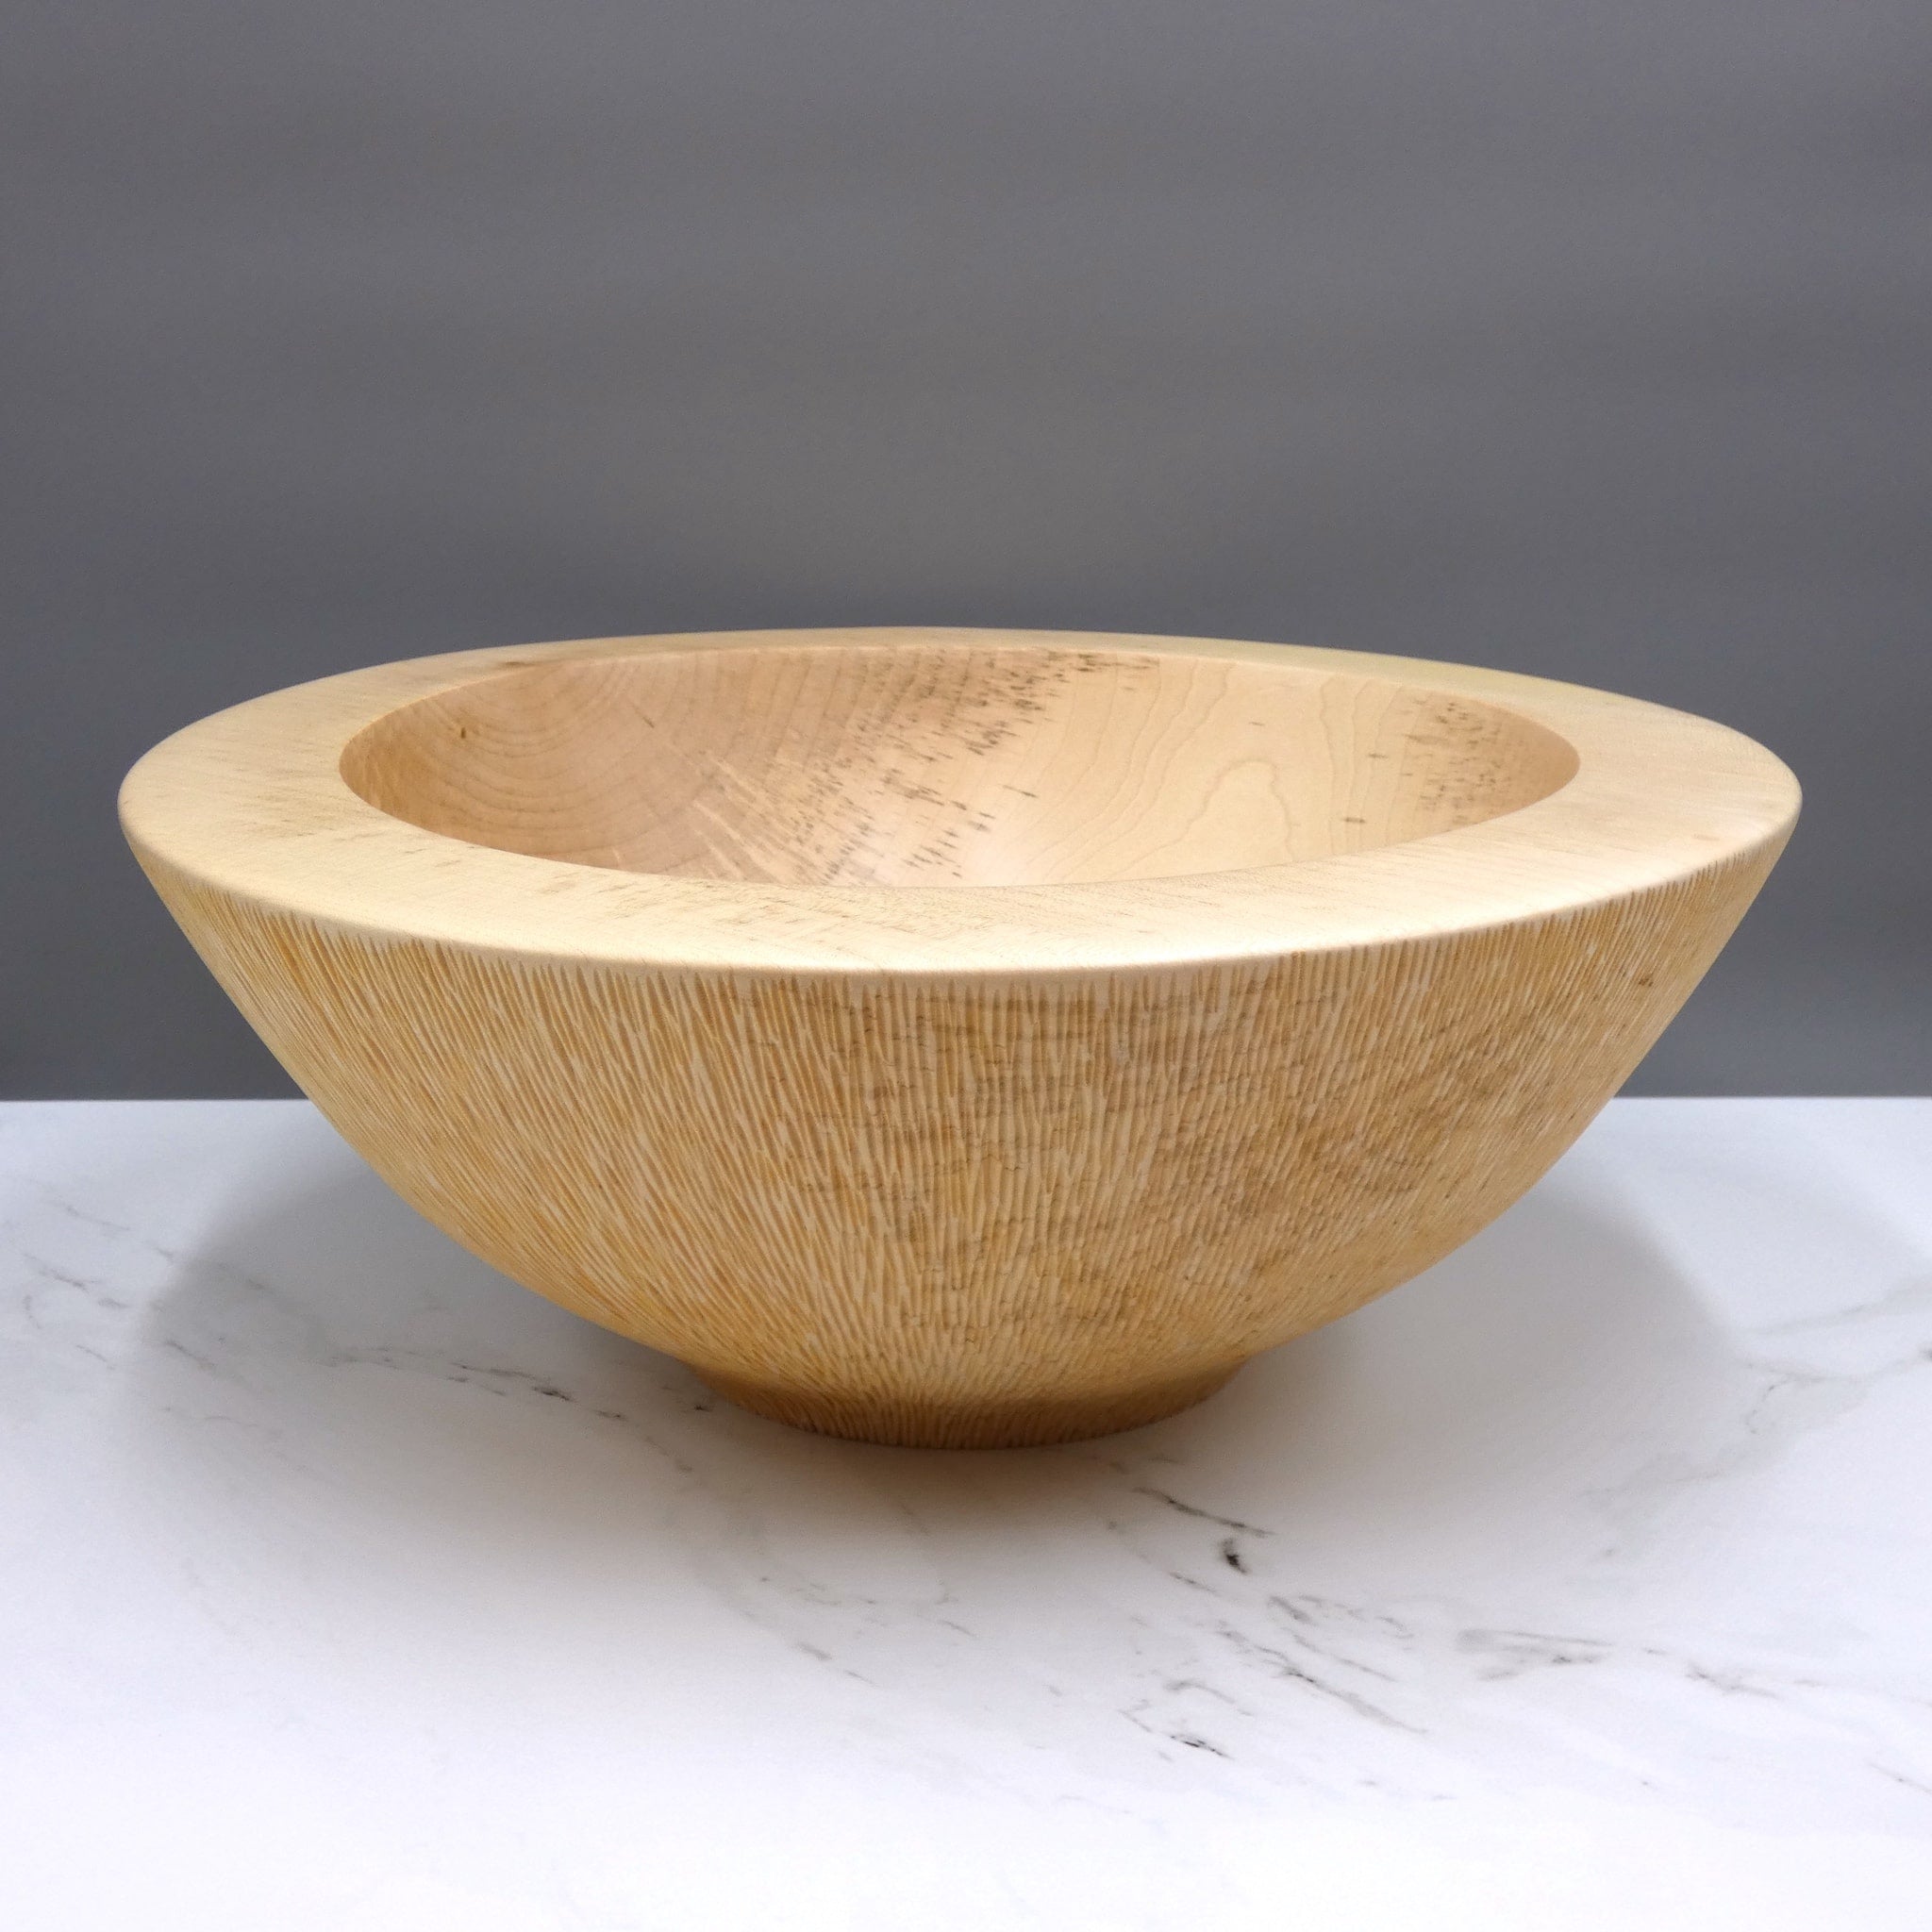 Carved sycamore bowl by woodturner Howard Moody